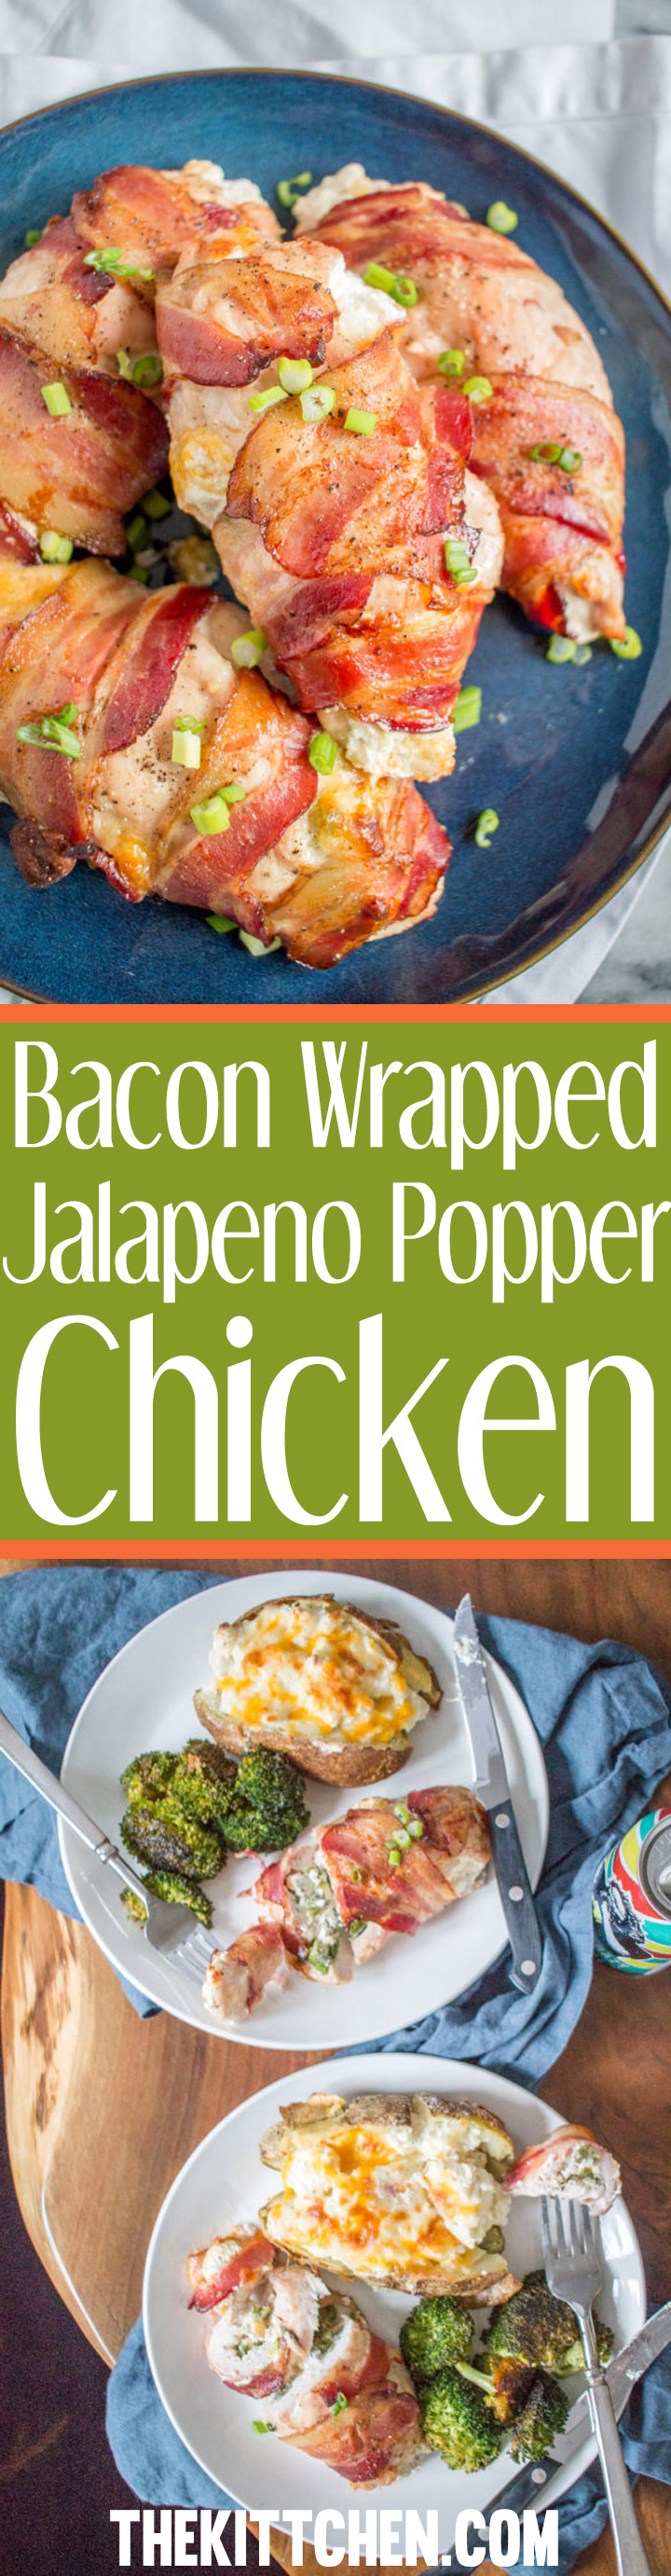 You will love this easy and delicious dinner recipe for Bacon Wrapped Jalapeño Popper Chicken! It's an easy weeknight dinner that takes only 10 minutes of active preparation time.